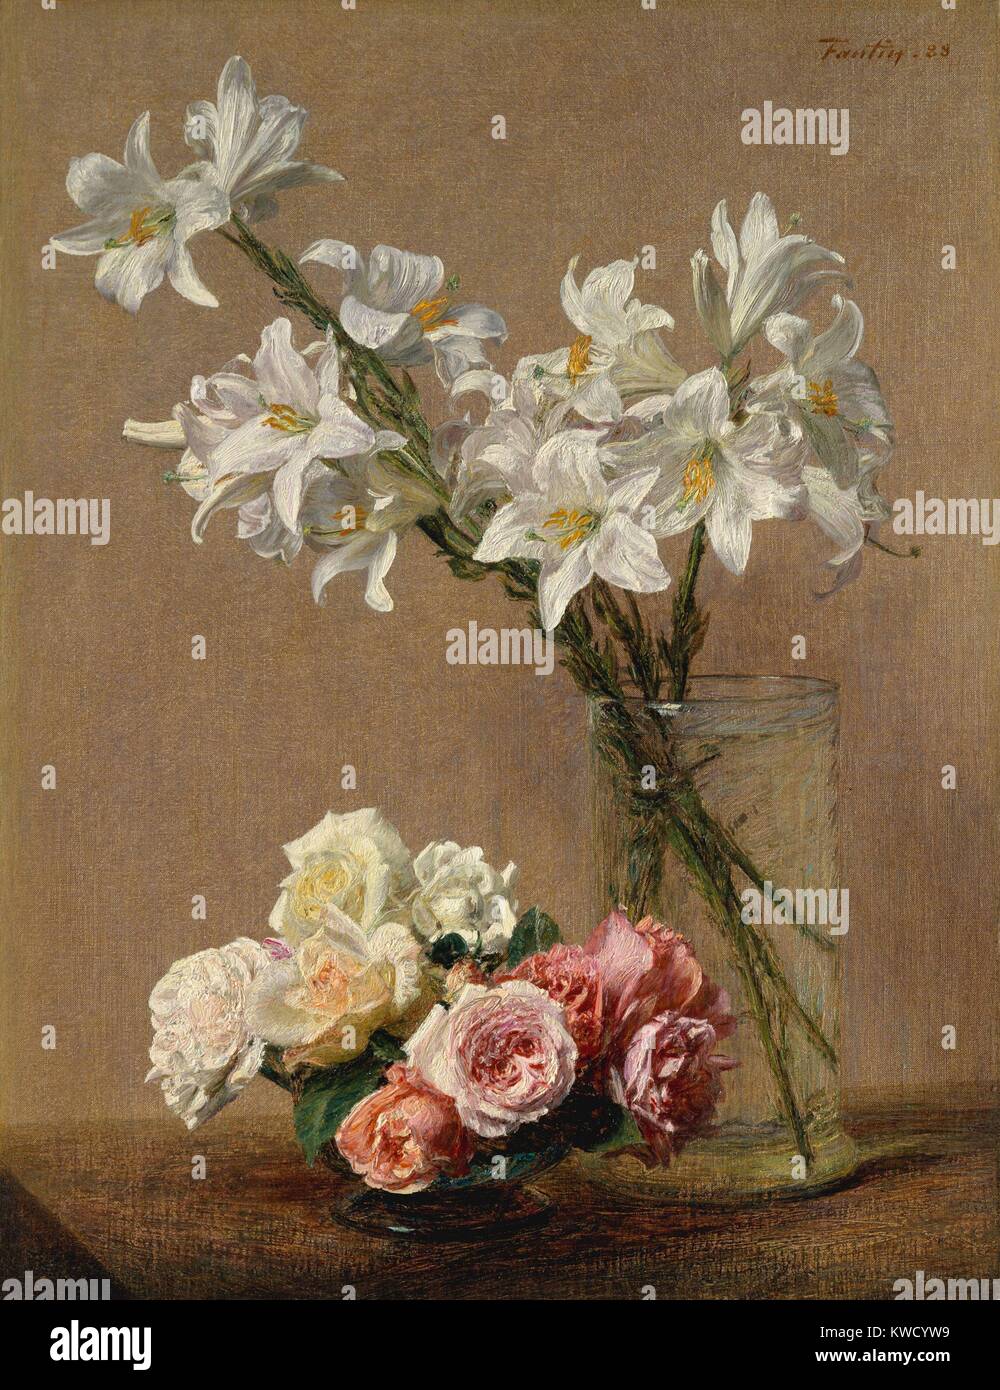 Roses and Lilies, by Henri Fantin-Latour, 1888, French impressionist painting, oil on canvas. Examination of this paintings detail, reveals Fantin-Latours use of the wood brush handle to delineate the flowers (BSLOC 2017 3 154) Stock Photo